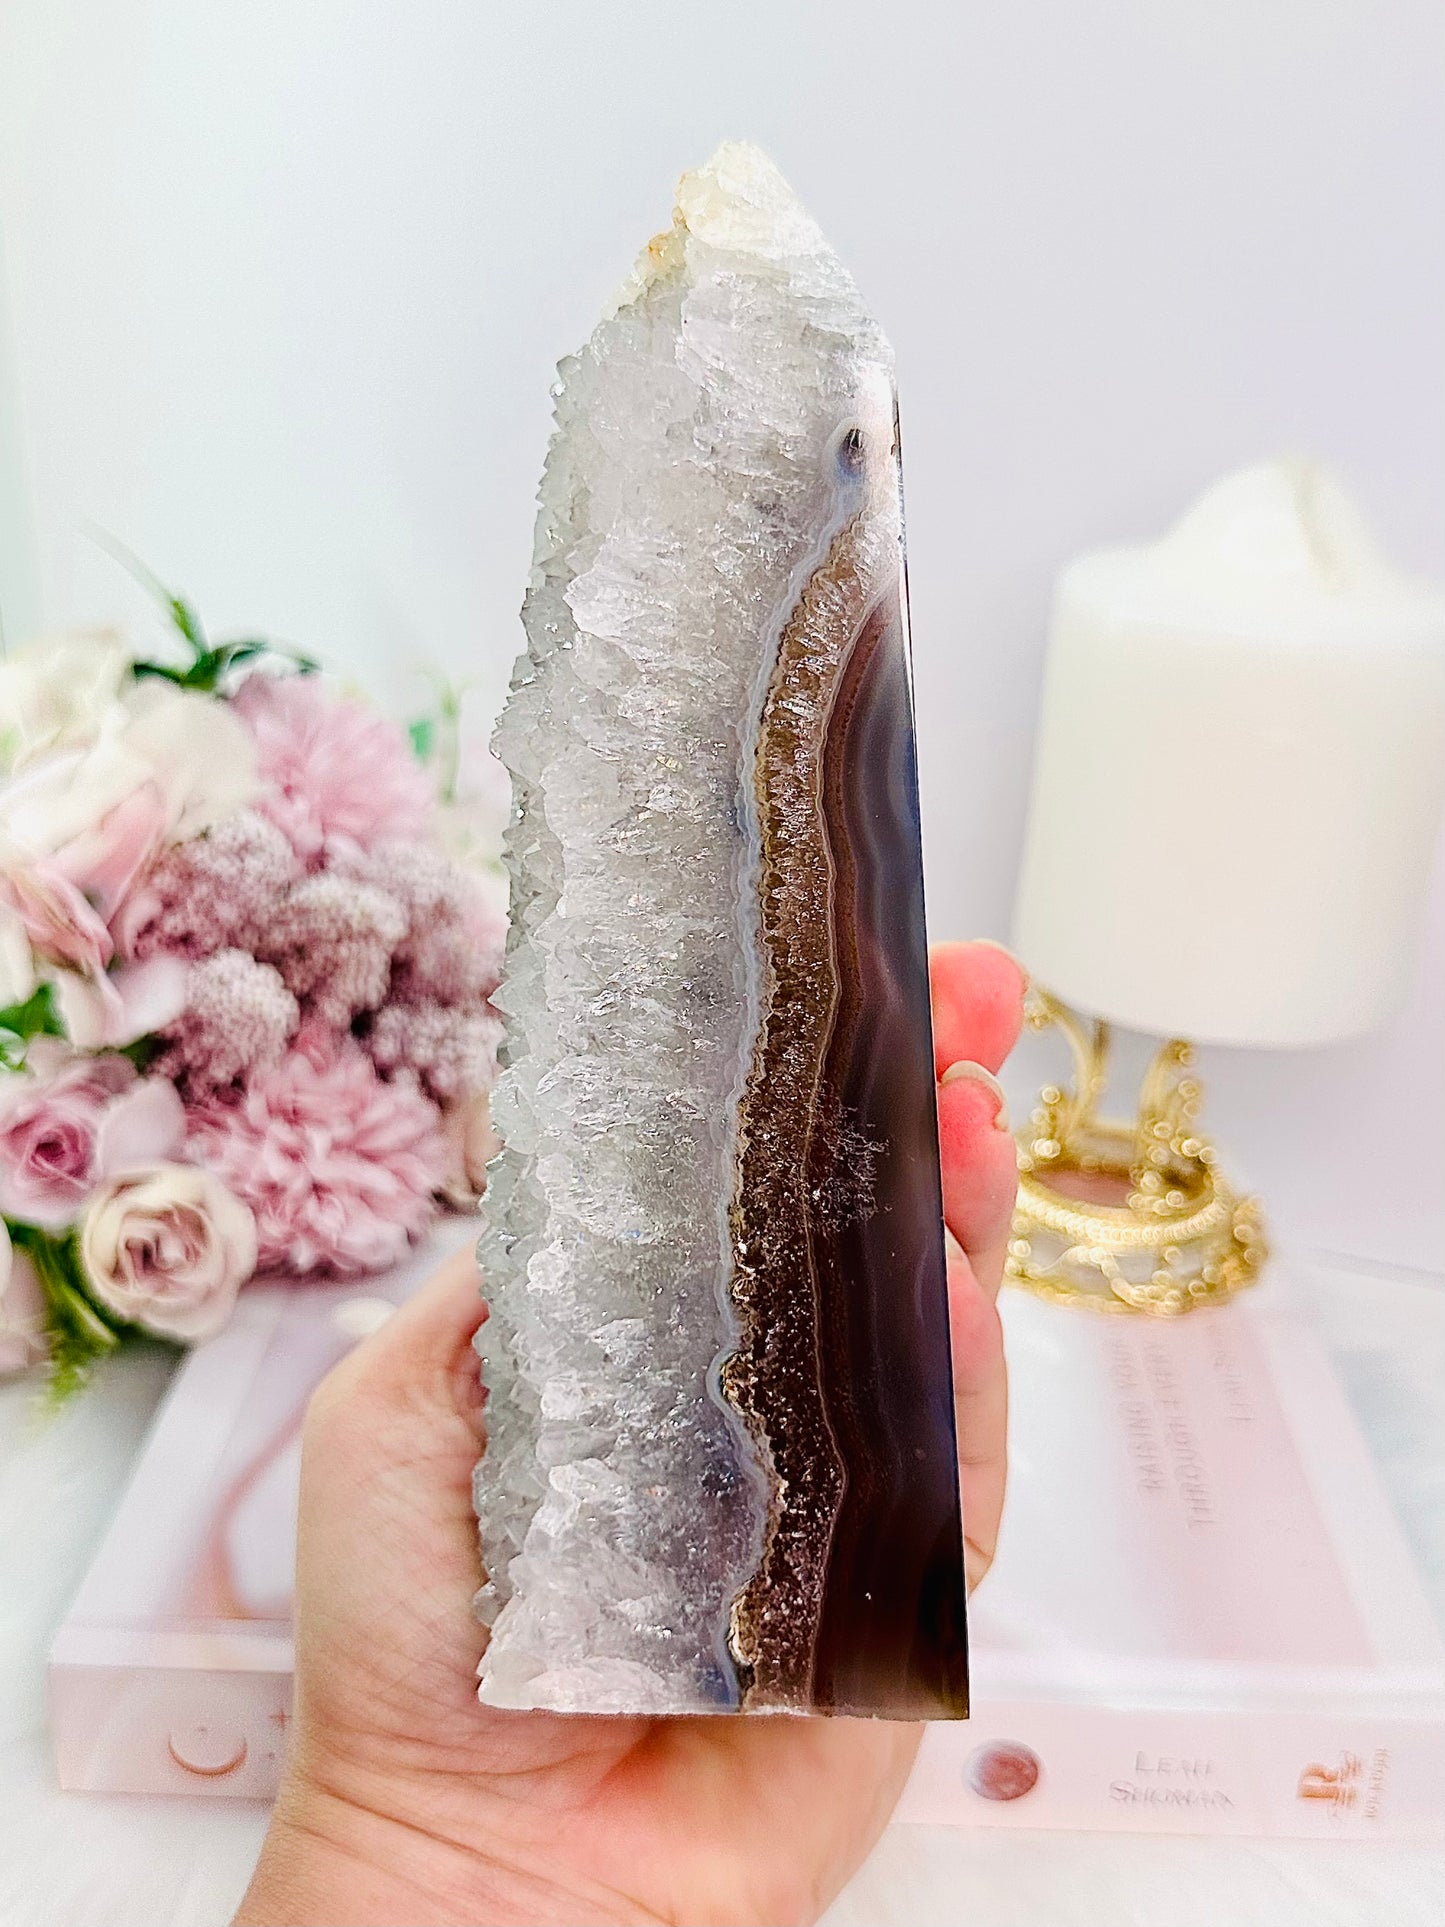 Classy & Fabulous Large 750gram Druzy Agate Tower From Brazil Just Gorgeous